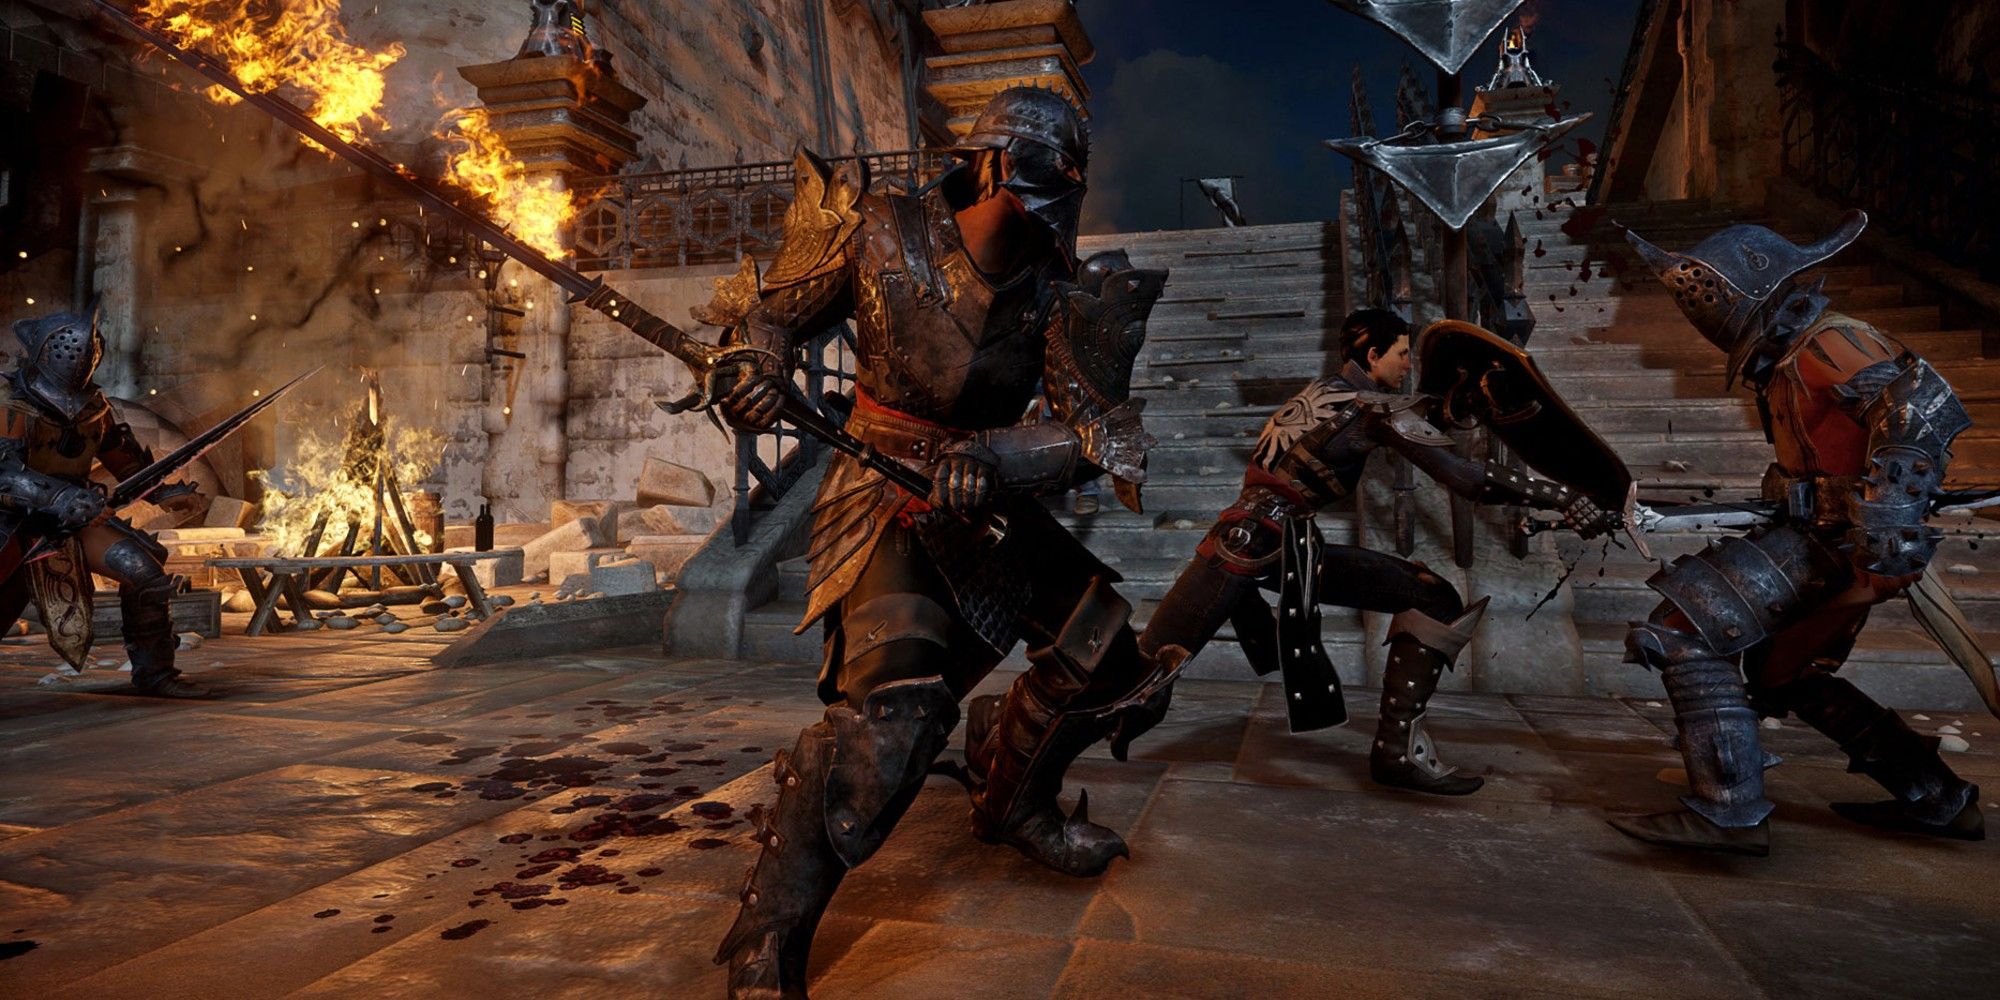 Altid Tilstand solopgang Best Warrior Build in Dragon Age: Inquisition | Screen Rant